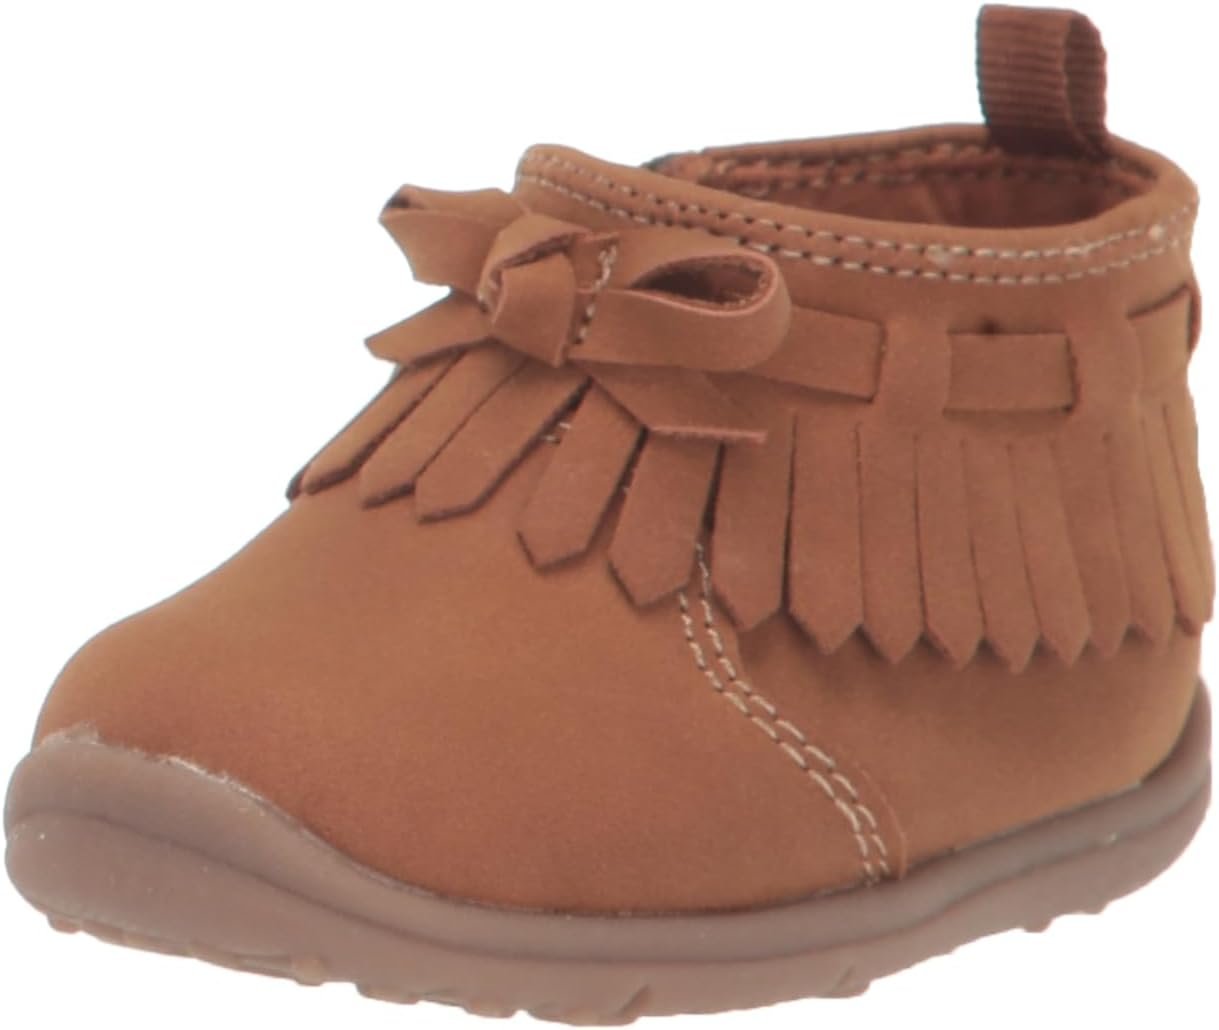 Carters Every Step Baby Camber-GP Boot, Brown, 2 US Unisex Infant